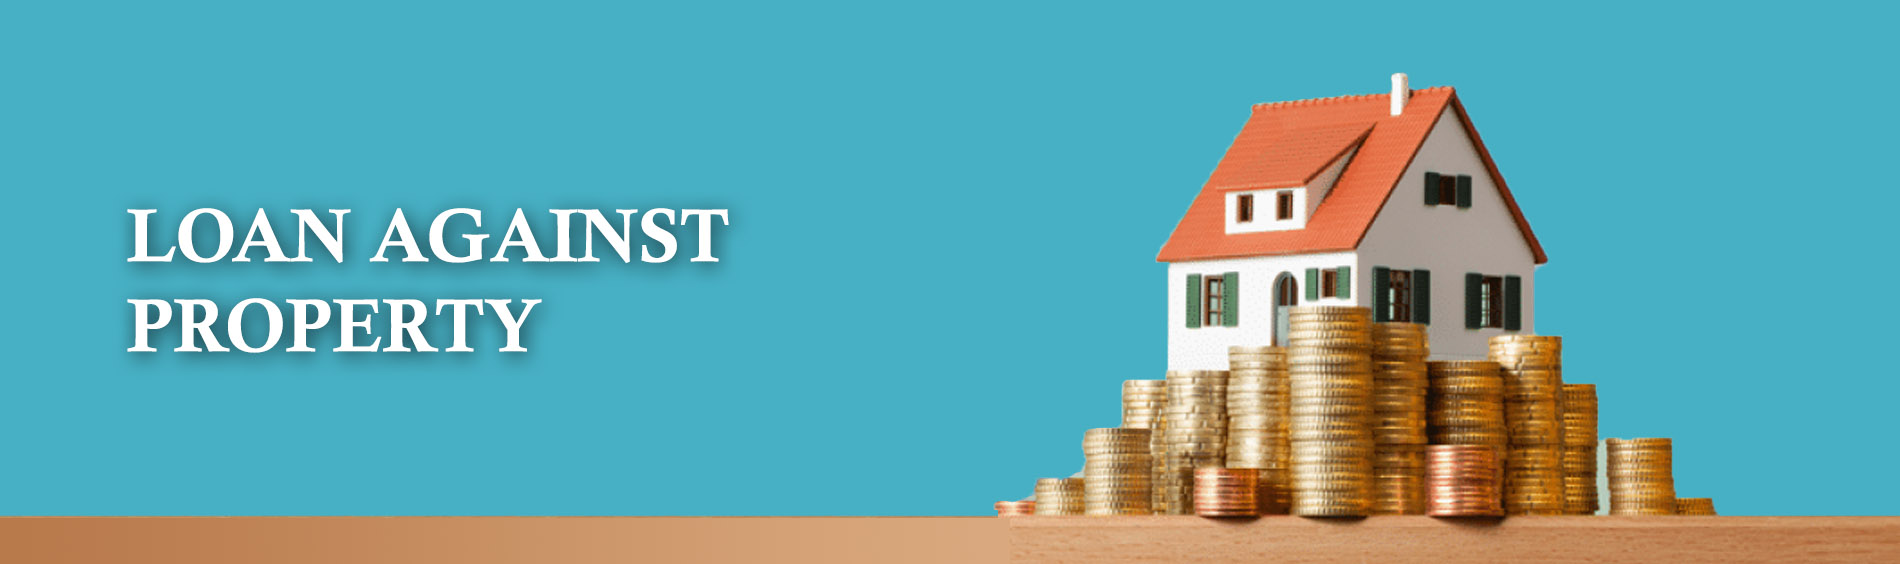 Property mortgage loan in Pune, Loan Against Property in Pune